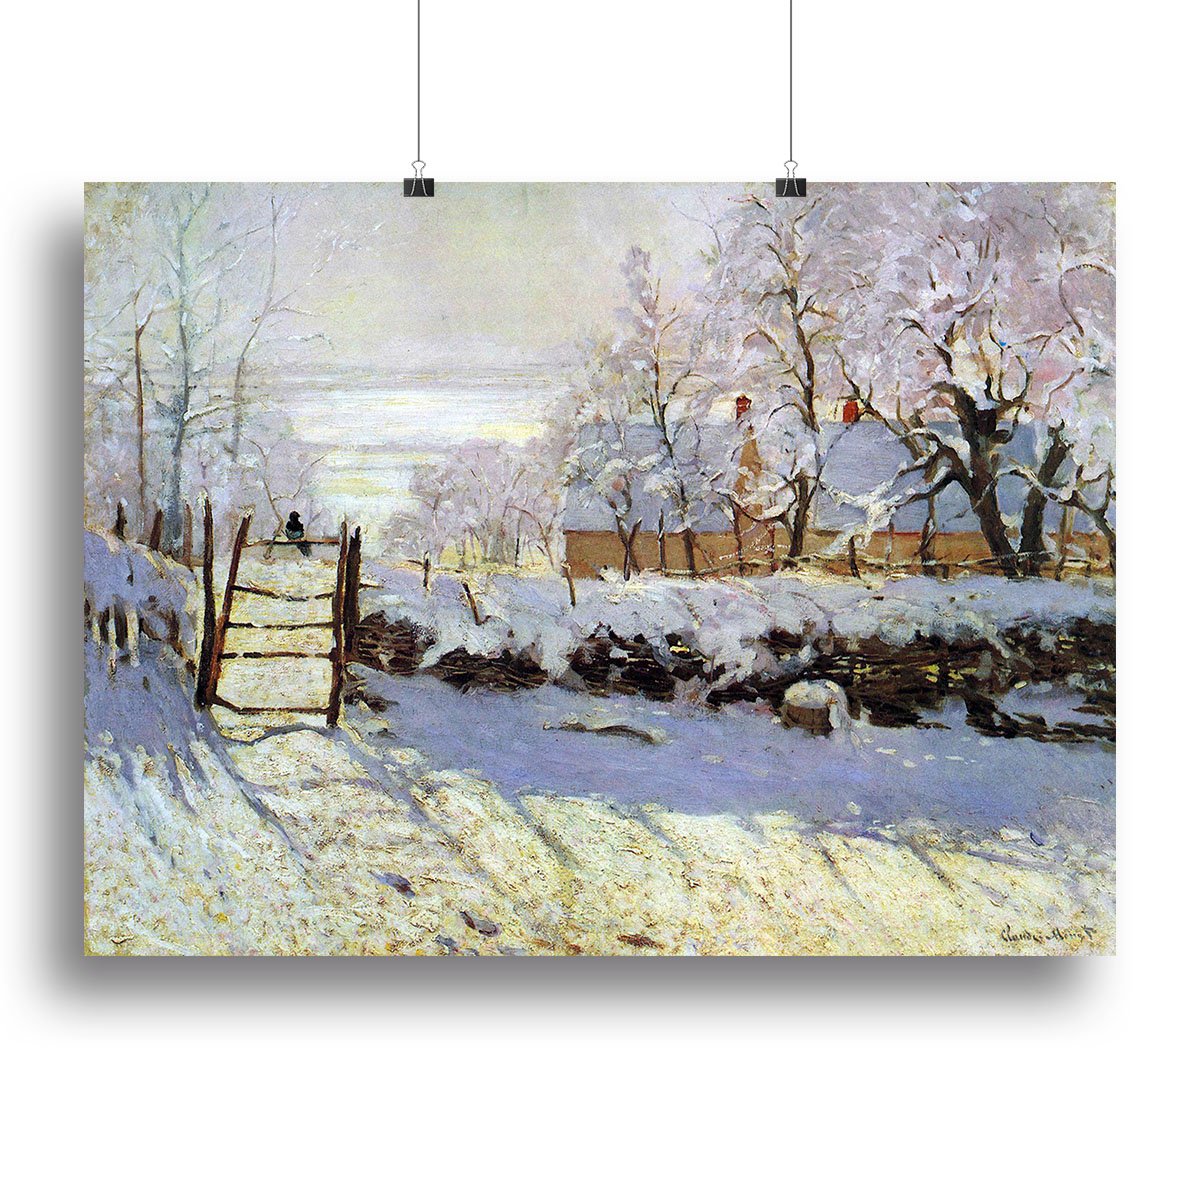 The Magpie by Monet Canvas Print or Poster